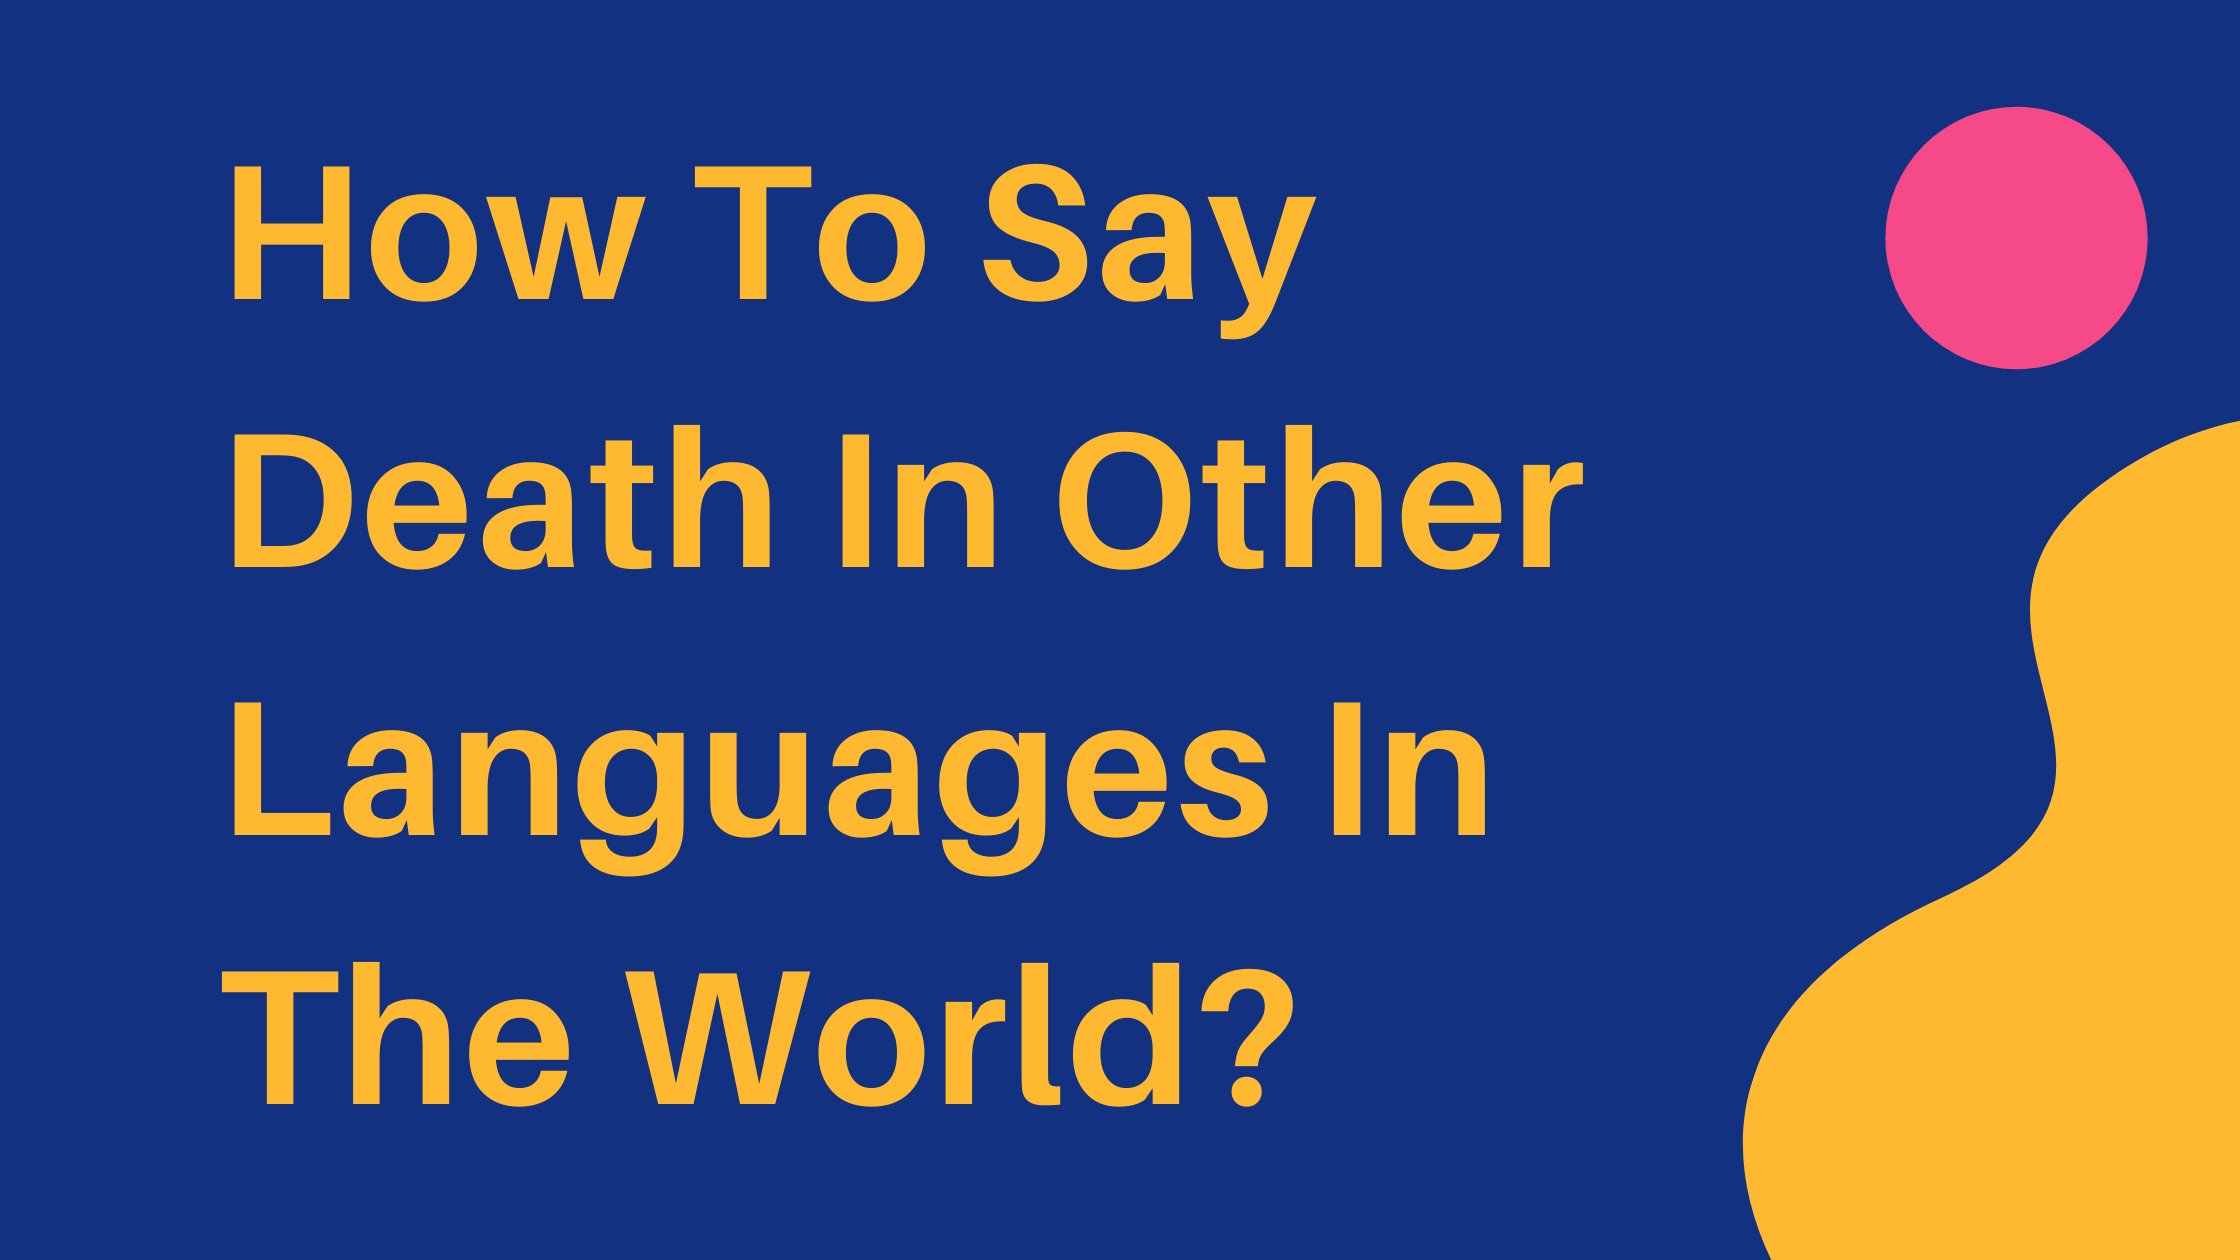 How to say Death in different languages in the world, words for death in other languages, death translated in other languages